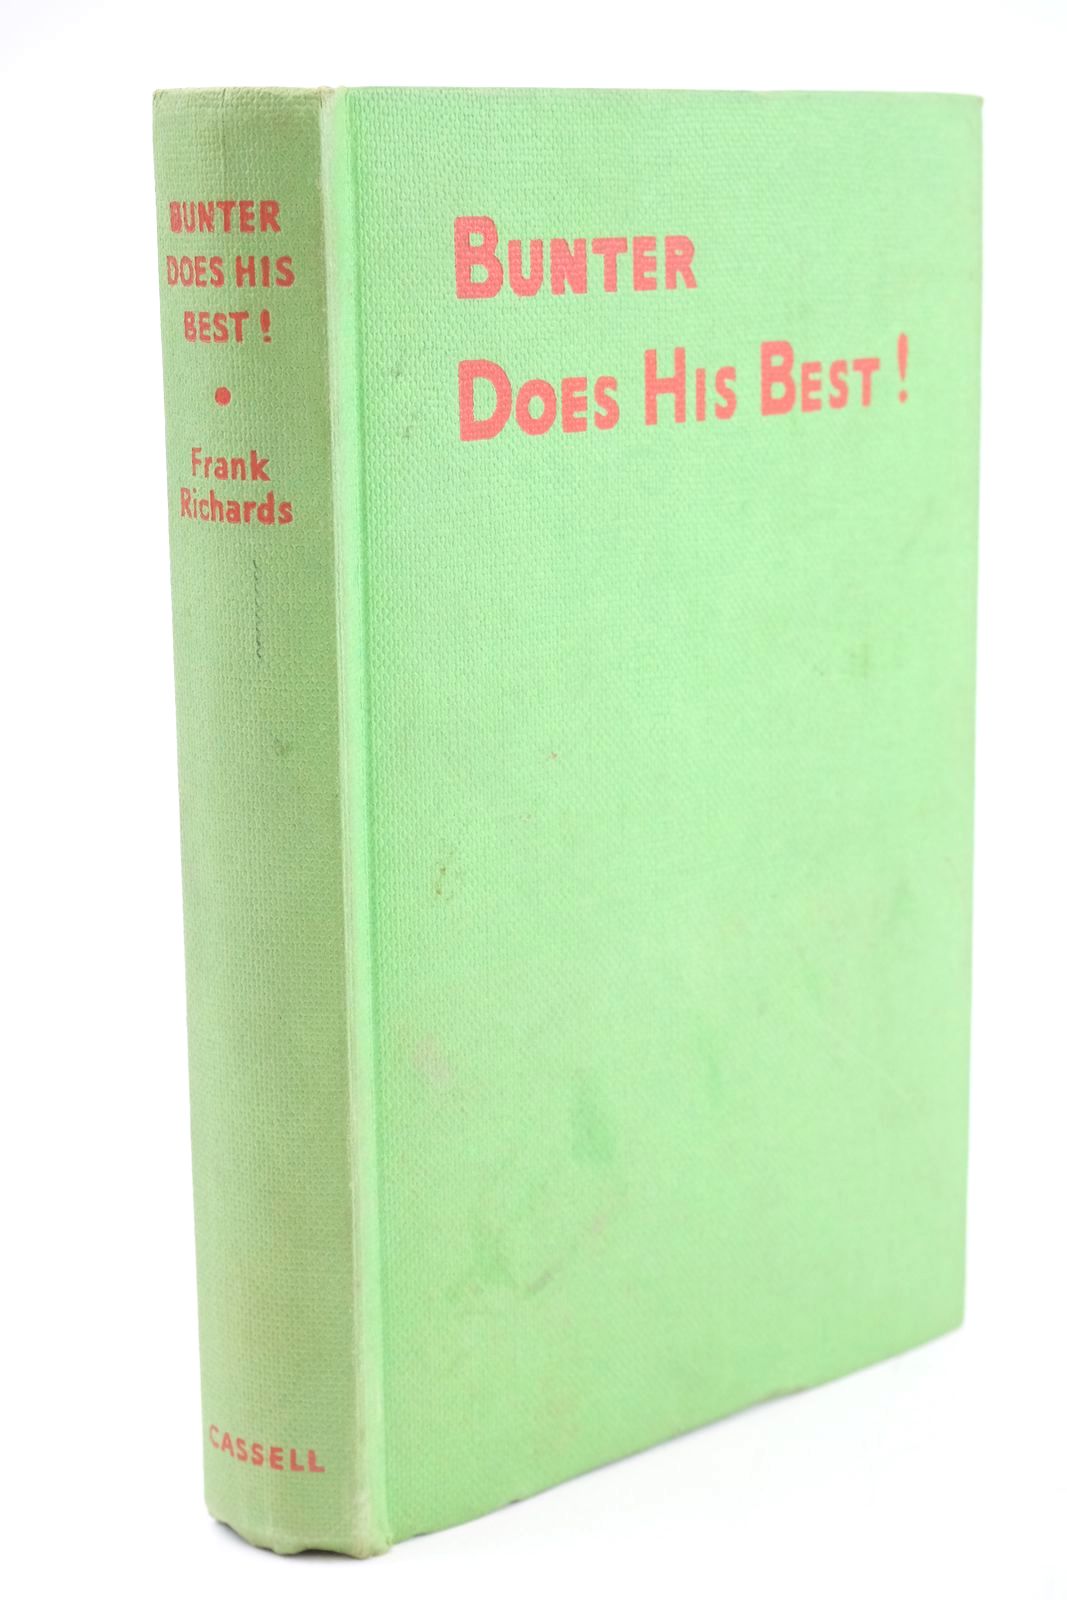 Photo of BUNTER DOES HIS BEST written by Richards, Frank illustrated by Macdonald, R.J. published by Cassell & Co. Ltd. (STOCK CODE: 1323902)  for sale by Stella & Rose's Books